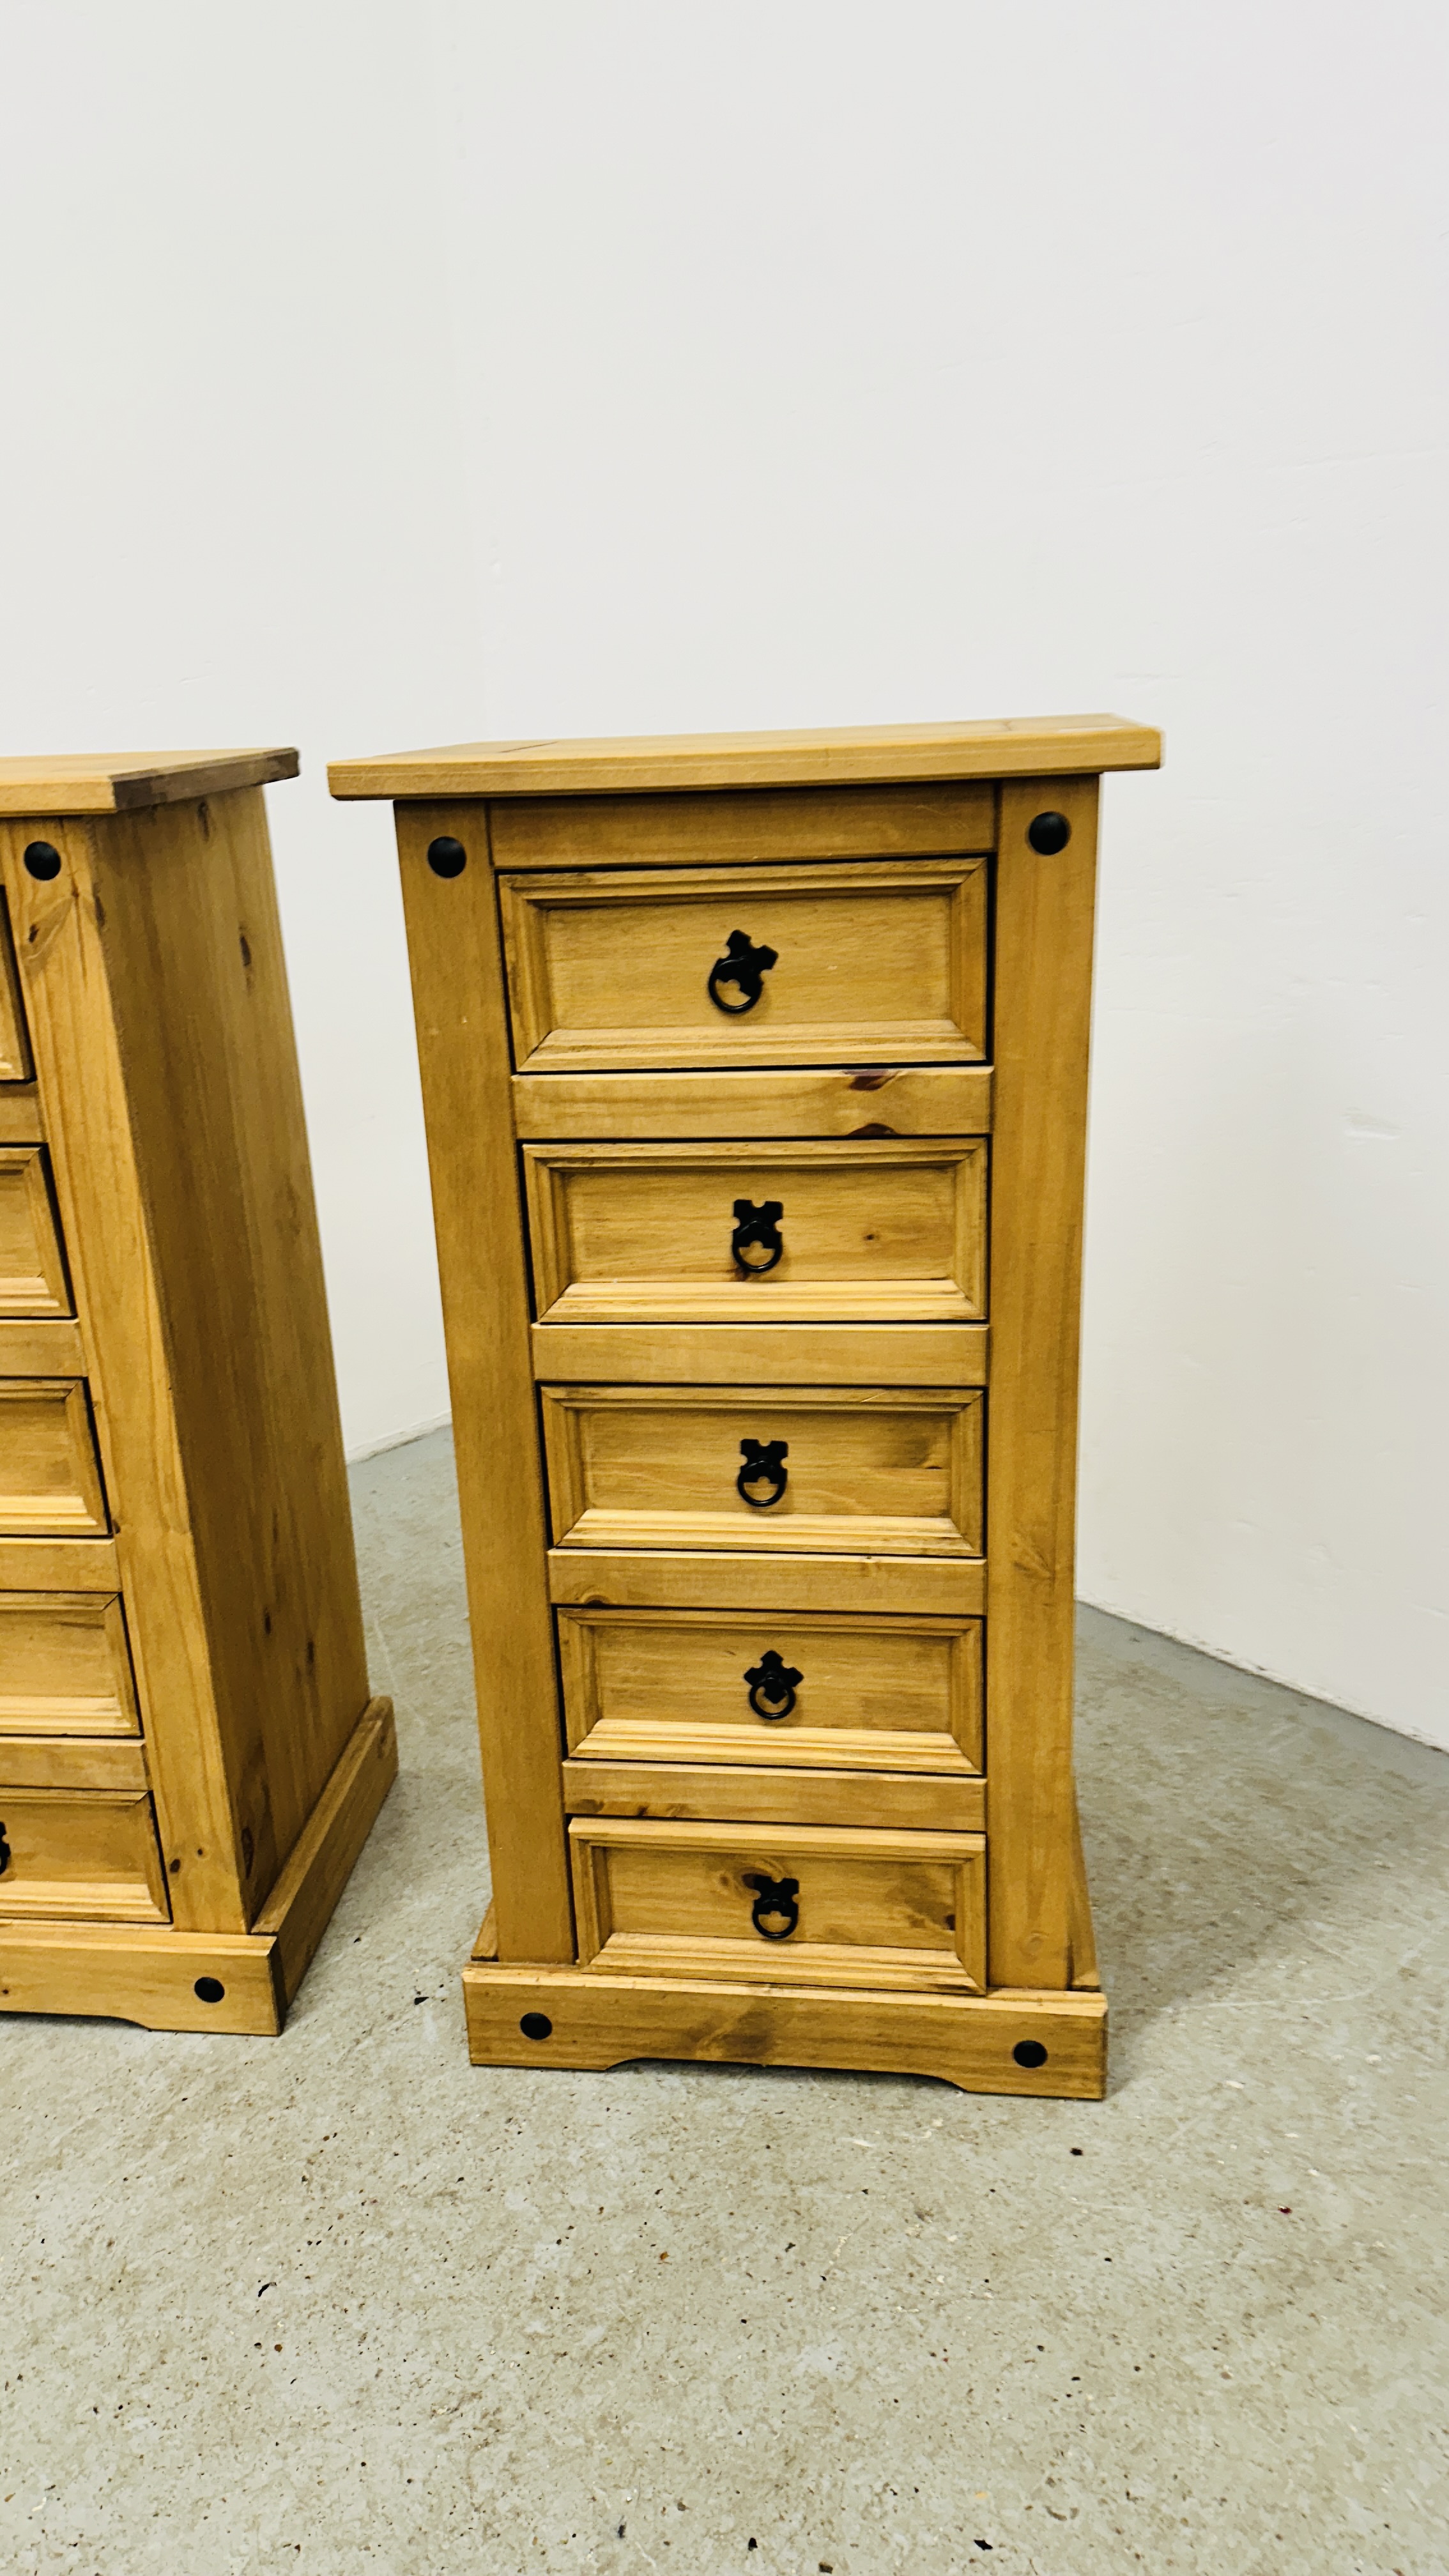 A PAIR OF FIVE DRAWER MEXICAN PINE "CORONA" TOWER CHESTS. - Image 2 of 9